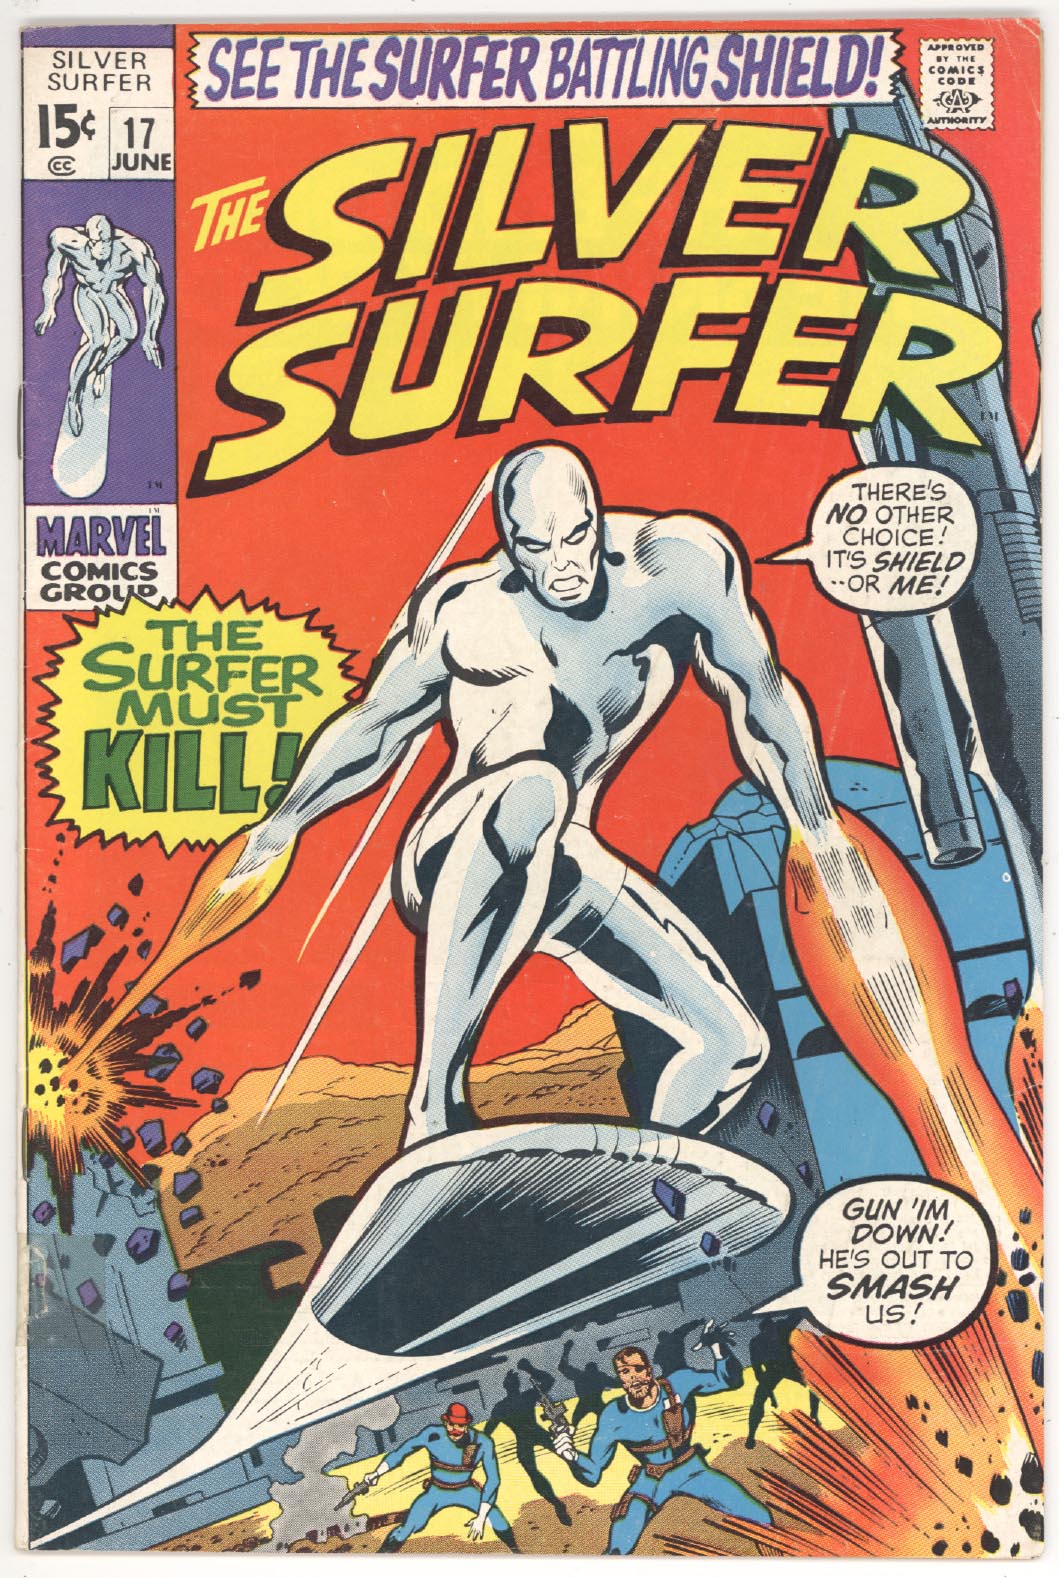 Silver Surfer #17 front